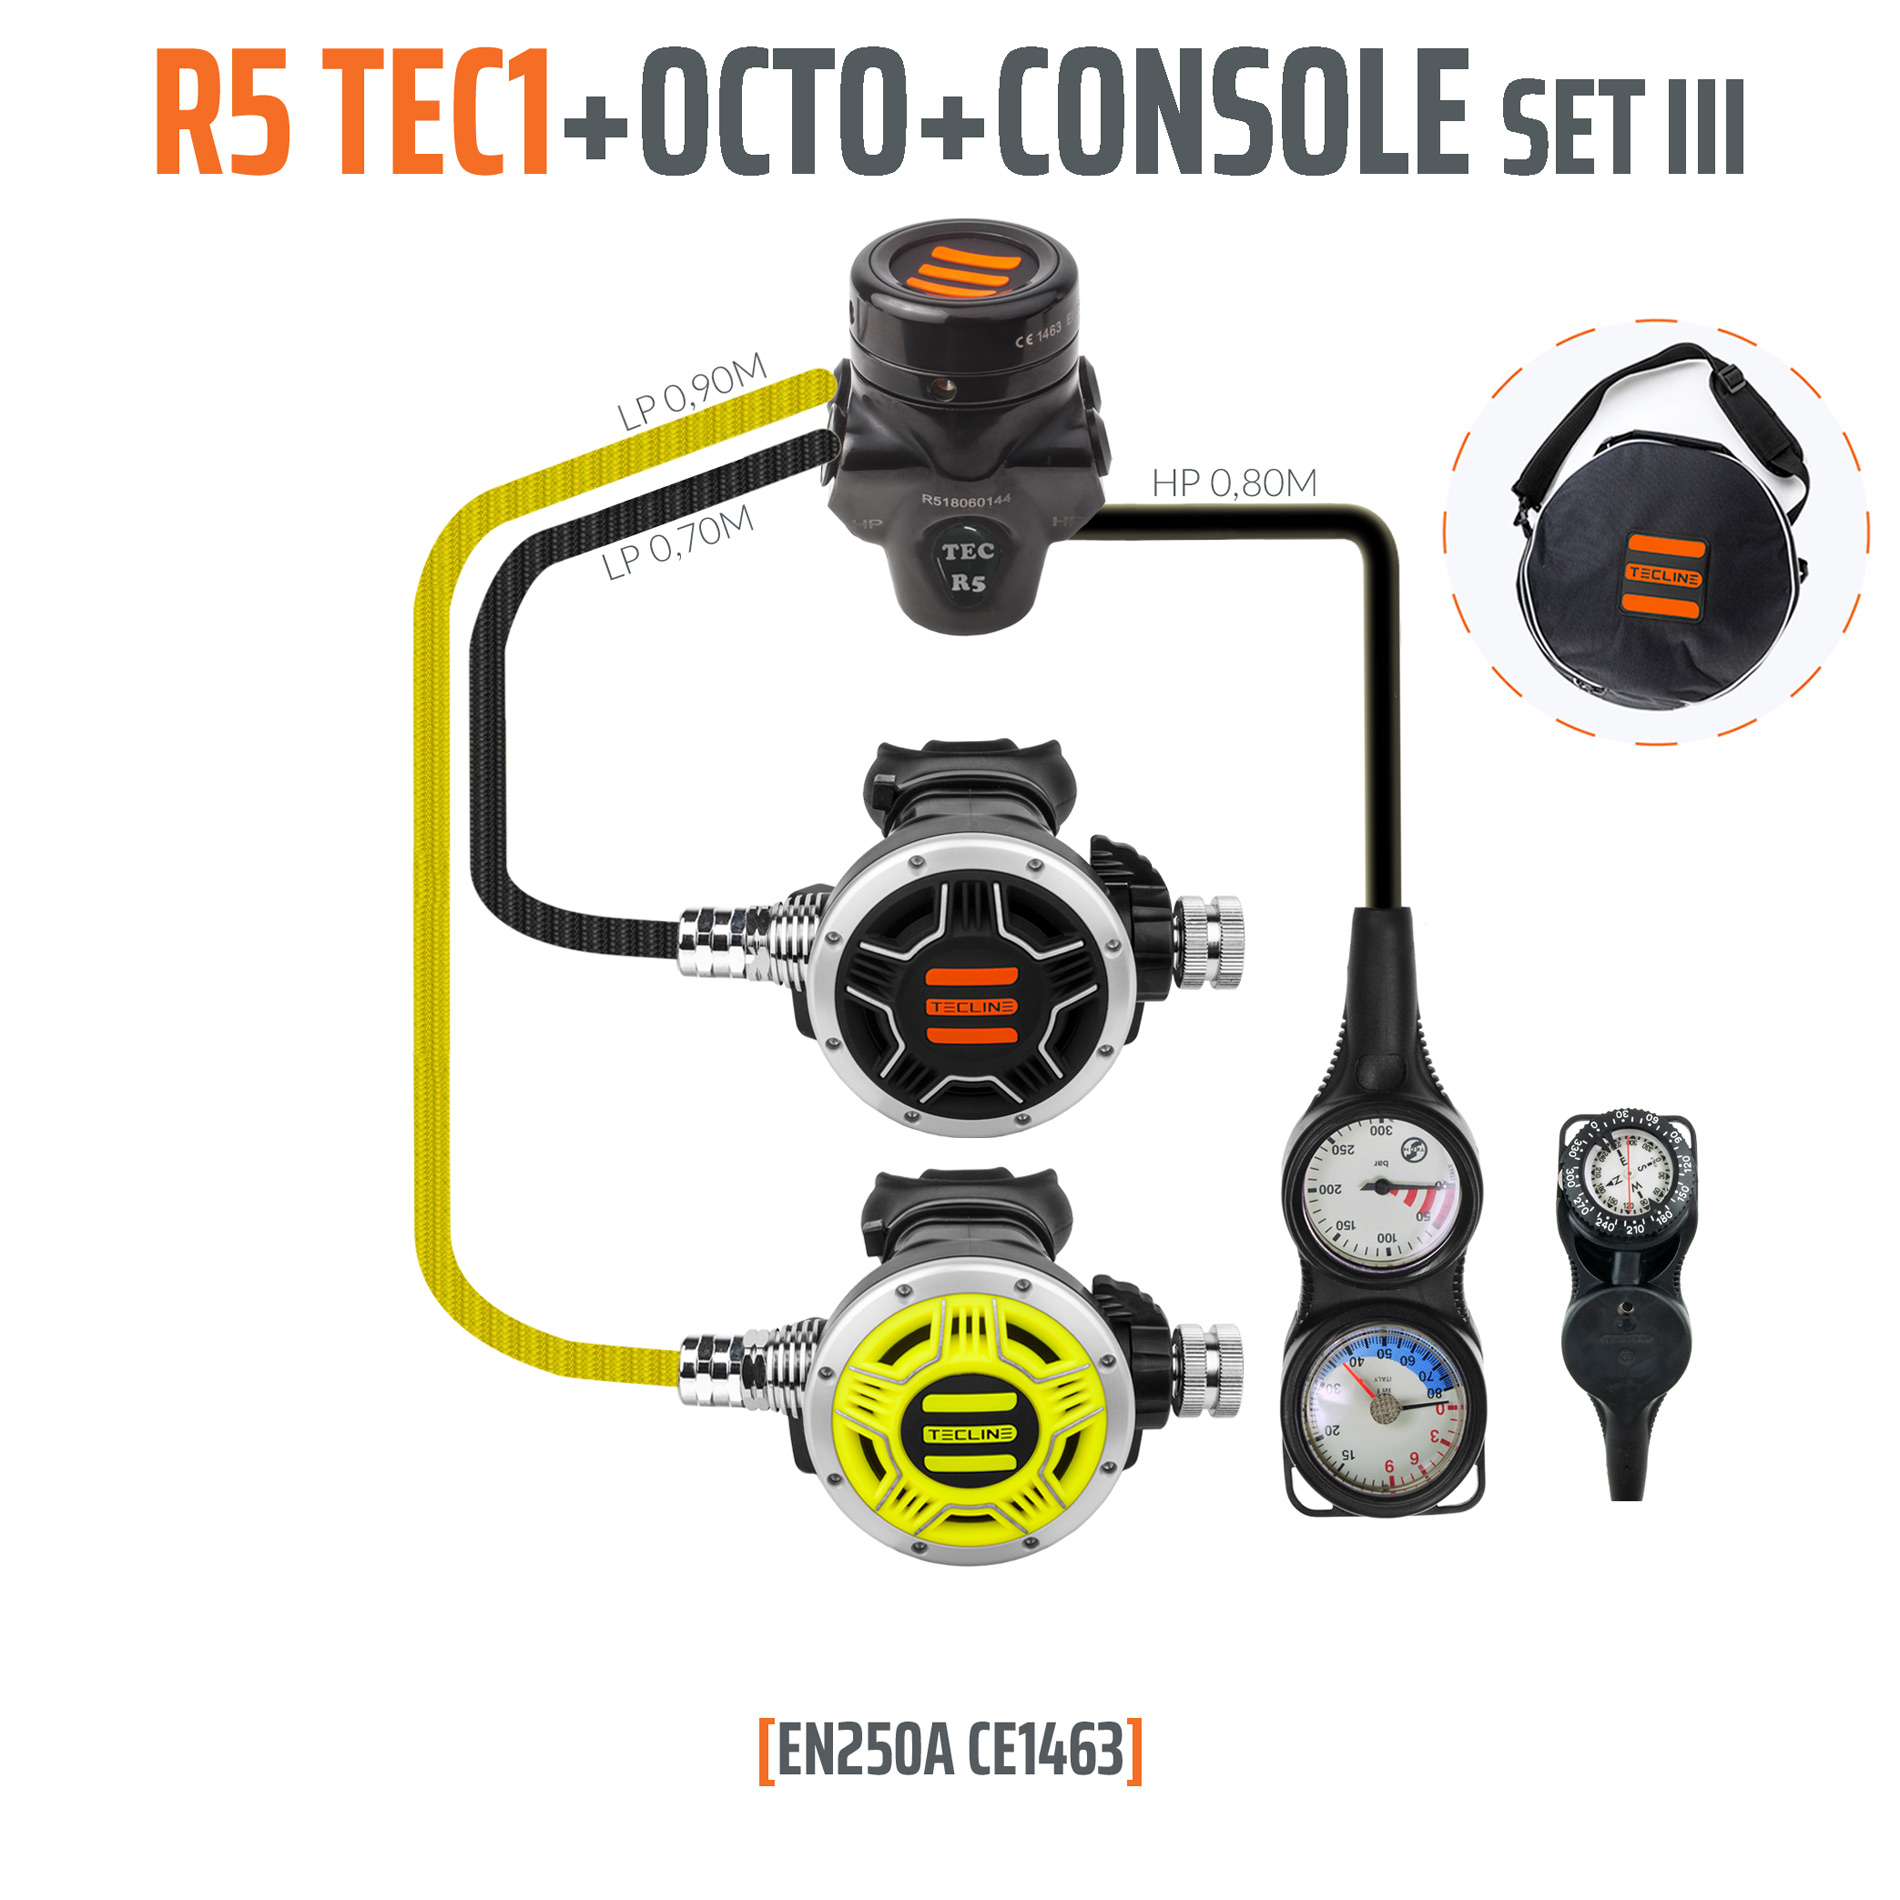 Tecline Regulator R5 TEC1 set III with octo and 3 elements console - EN250A